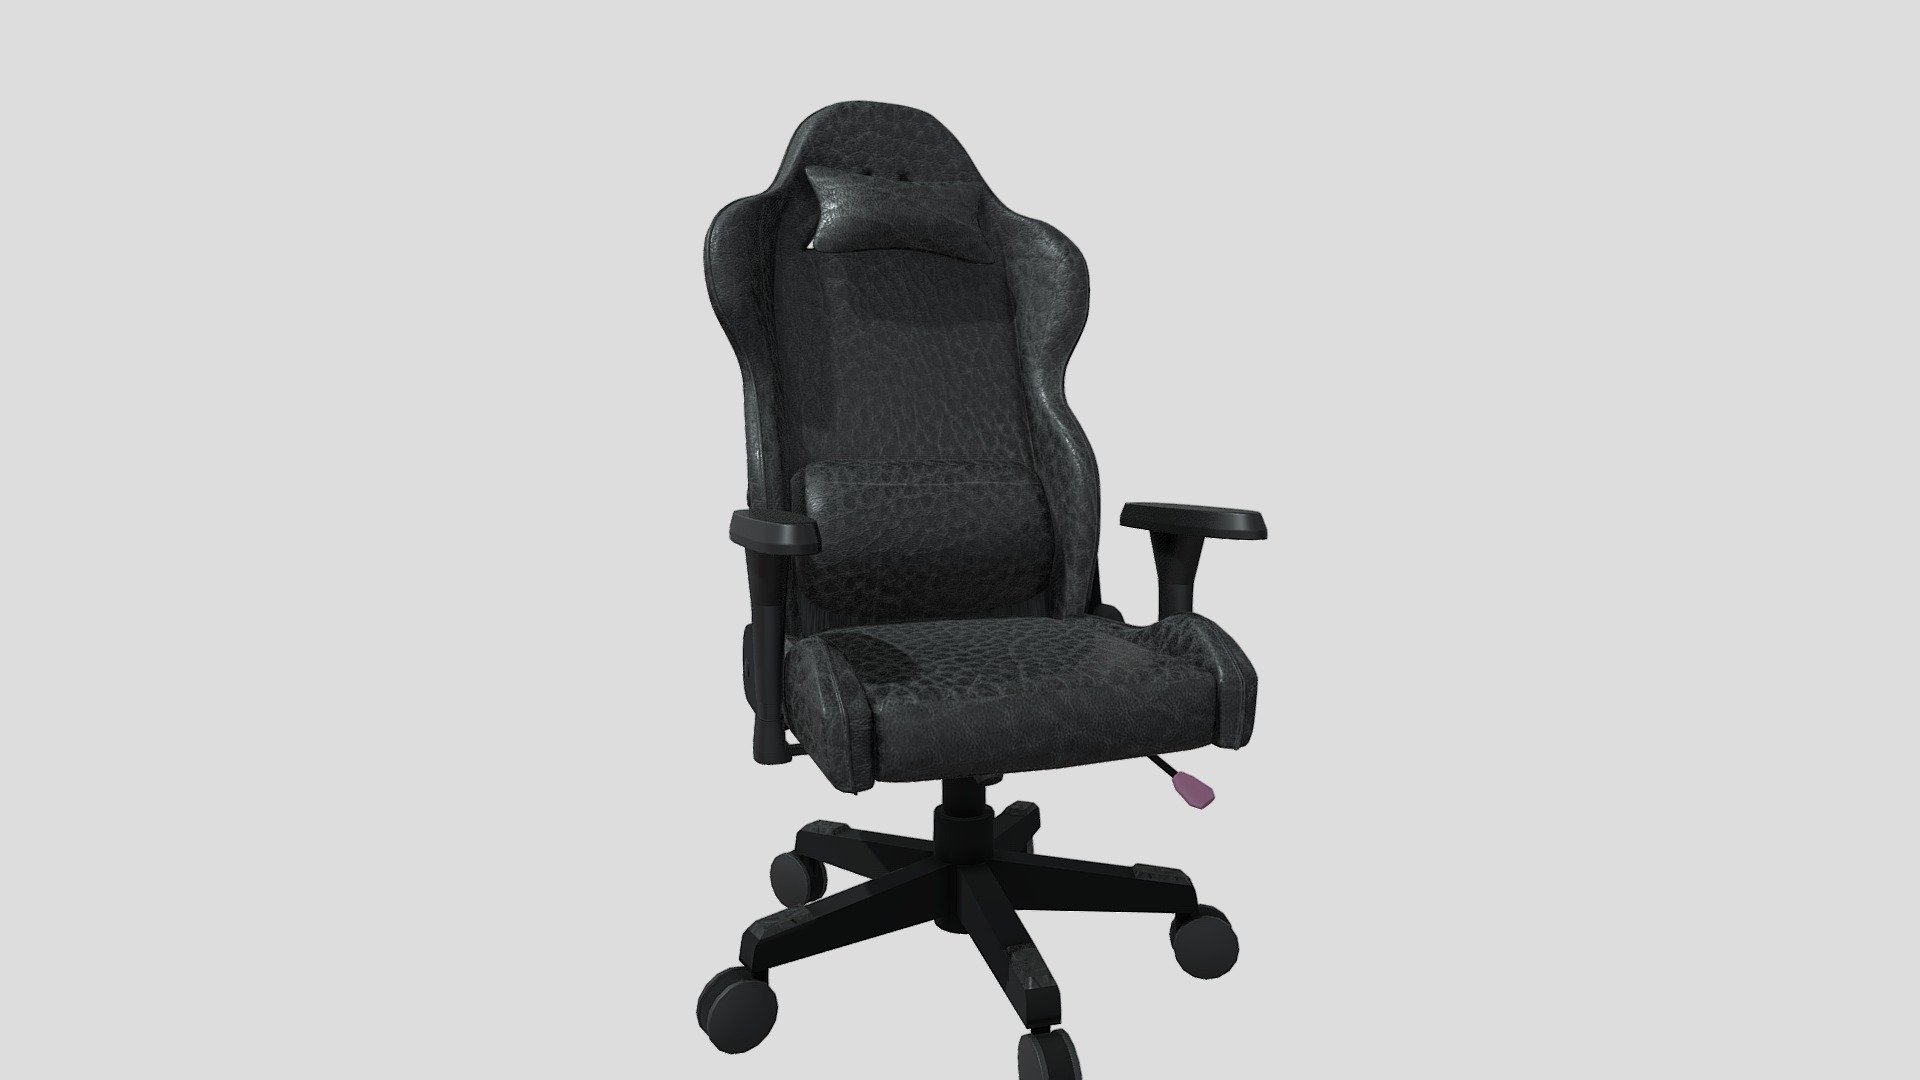 Very comfortable proffesional gaming chair which is perfect for your gaming room (rigged).
4149499809590621 for tea pls - Gaming chair - Download Free 3D model by Man1ac (@Maniac1) 3d model